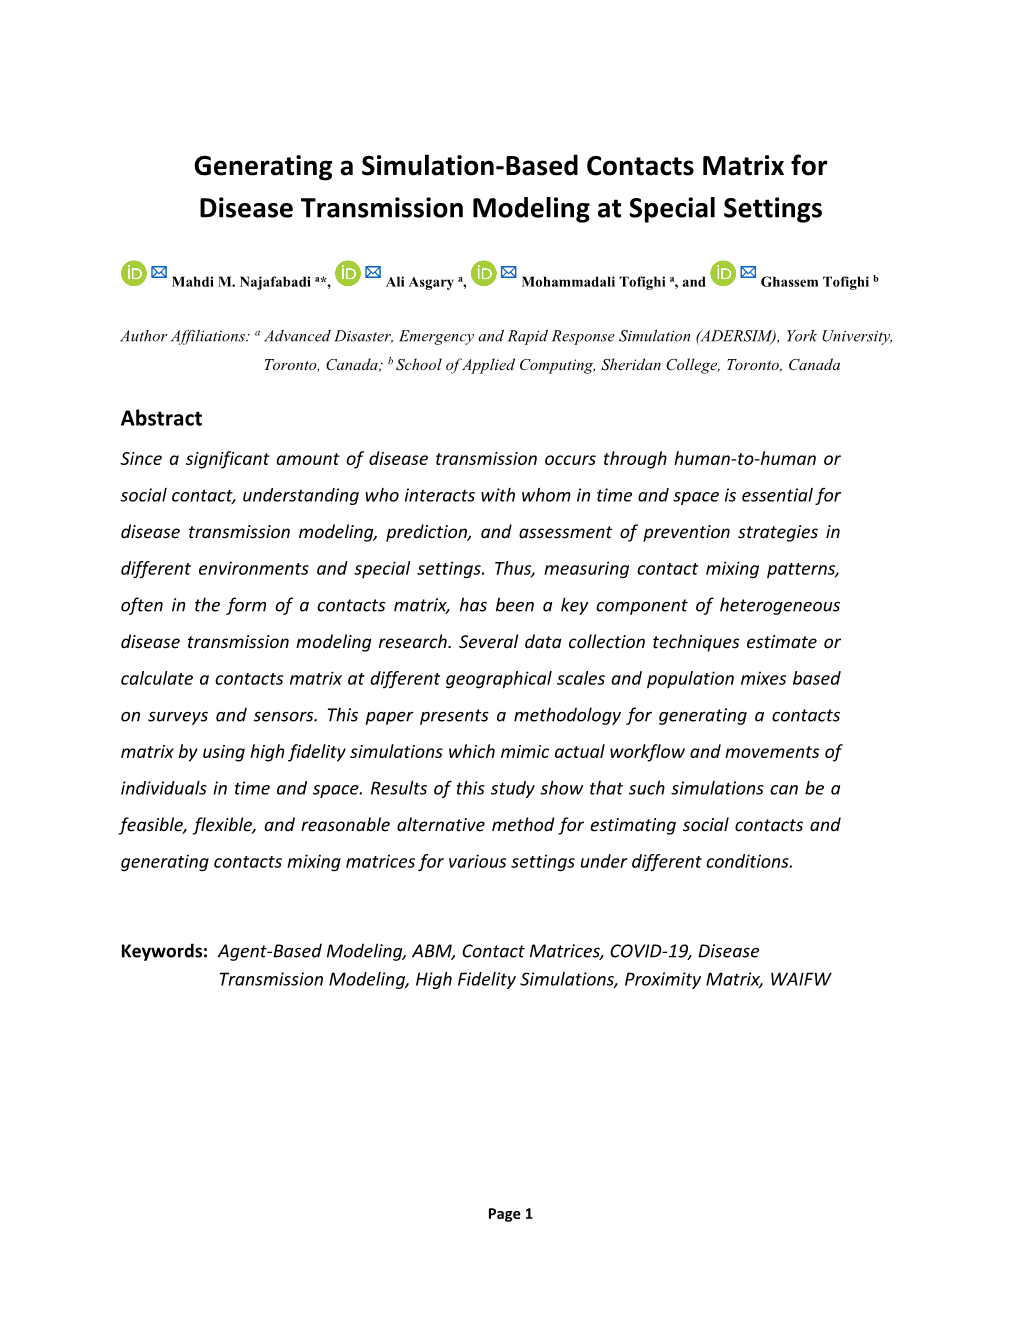 Generating a Simulation-Based Contacts Matrix for Disease Transmission Modeling at Special Settings